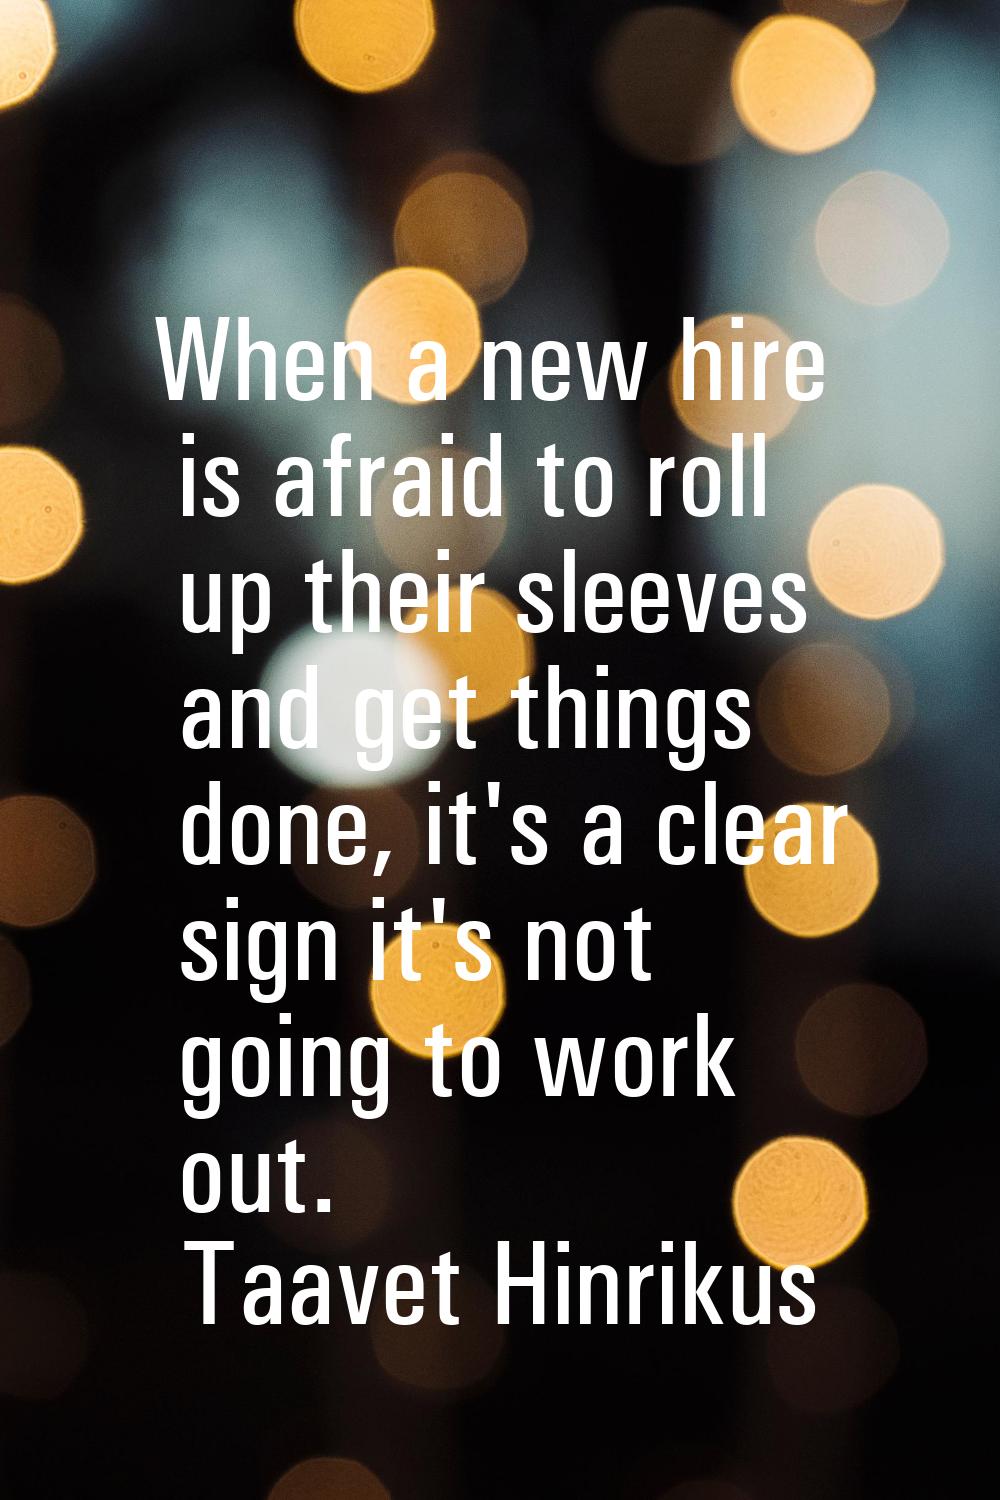 When a new hire is afraid to roll up their sleeves and get things done, it's a clear sign it's not 